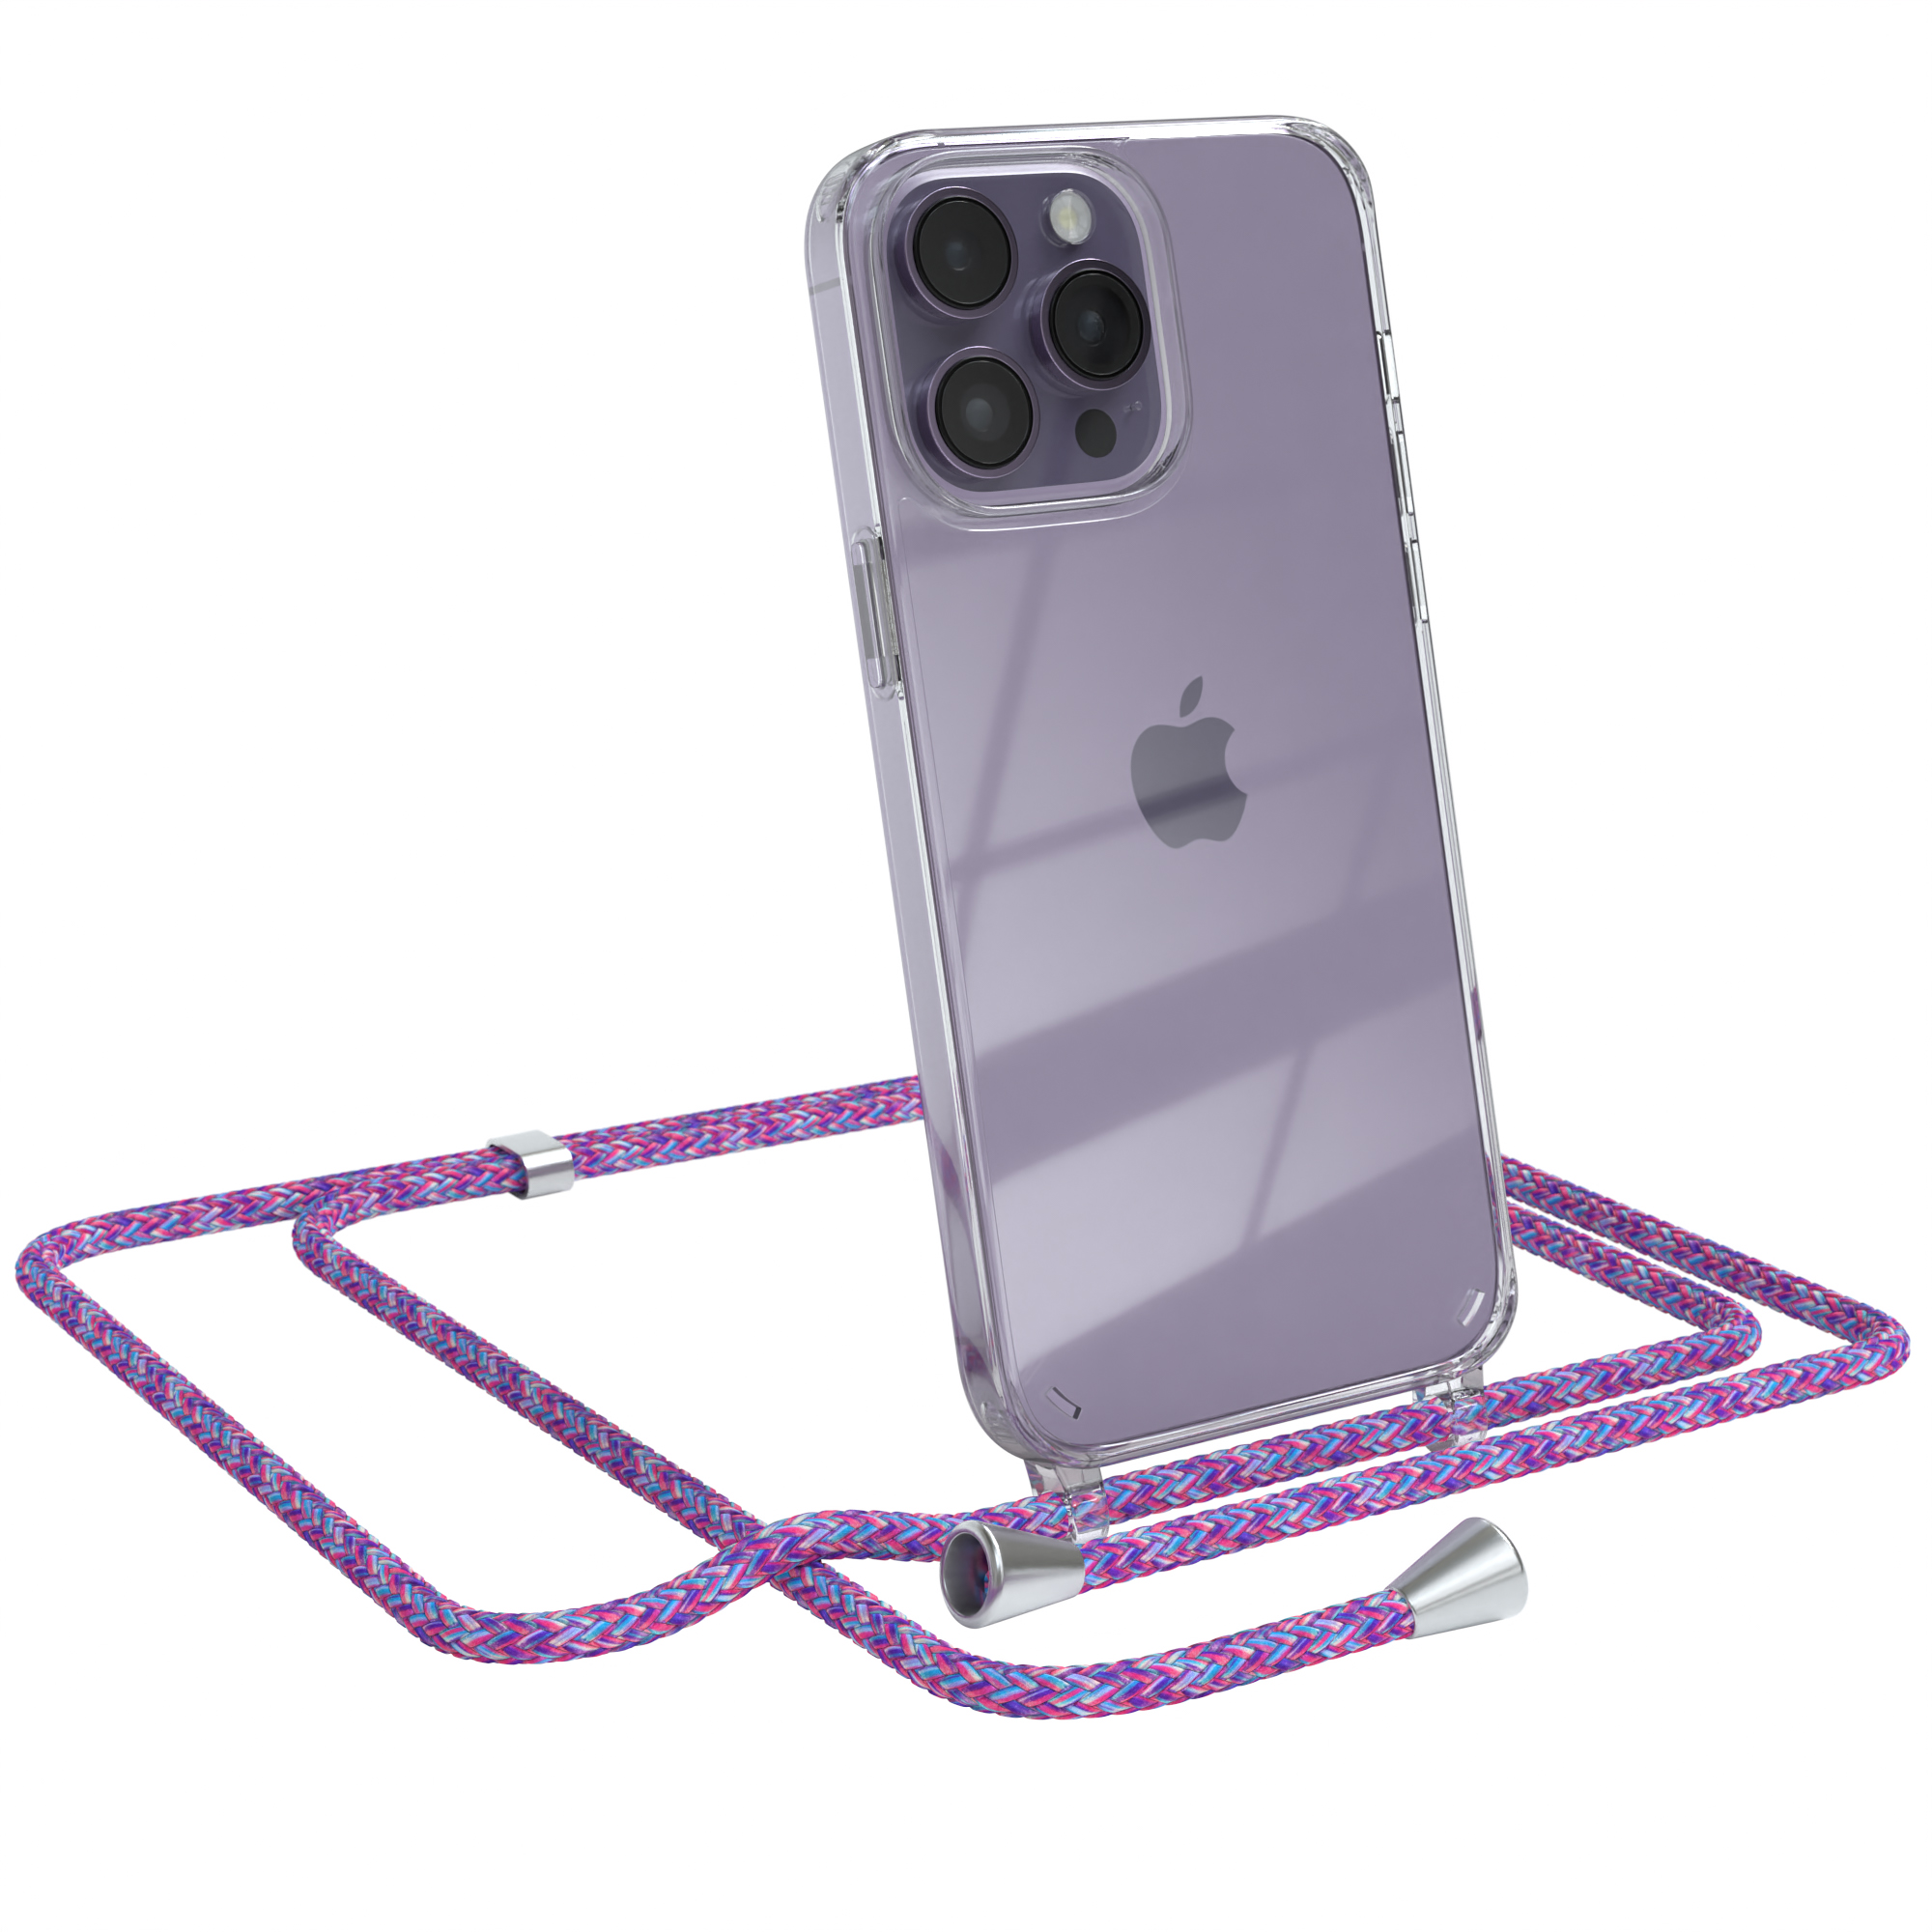 / Apple, 14 Silber Umhängeband, EAZY mit Max, iPhone Clips Cover Pro CASE Umhängetasche, Clear Lila